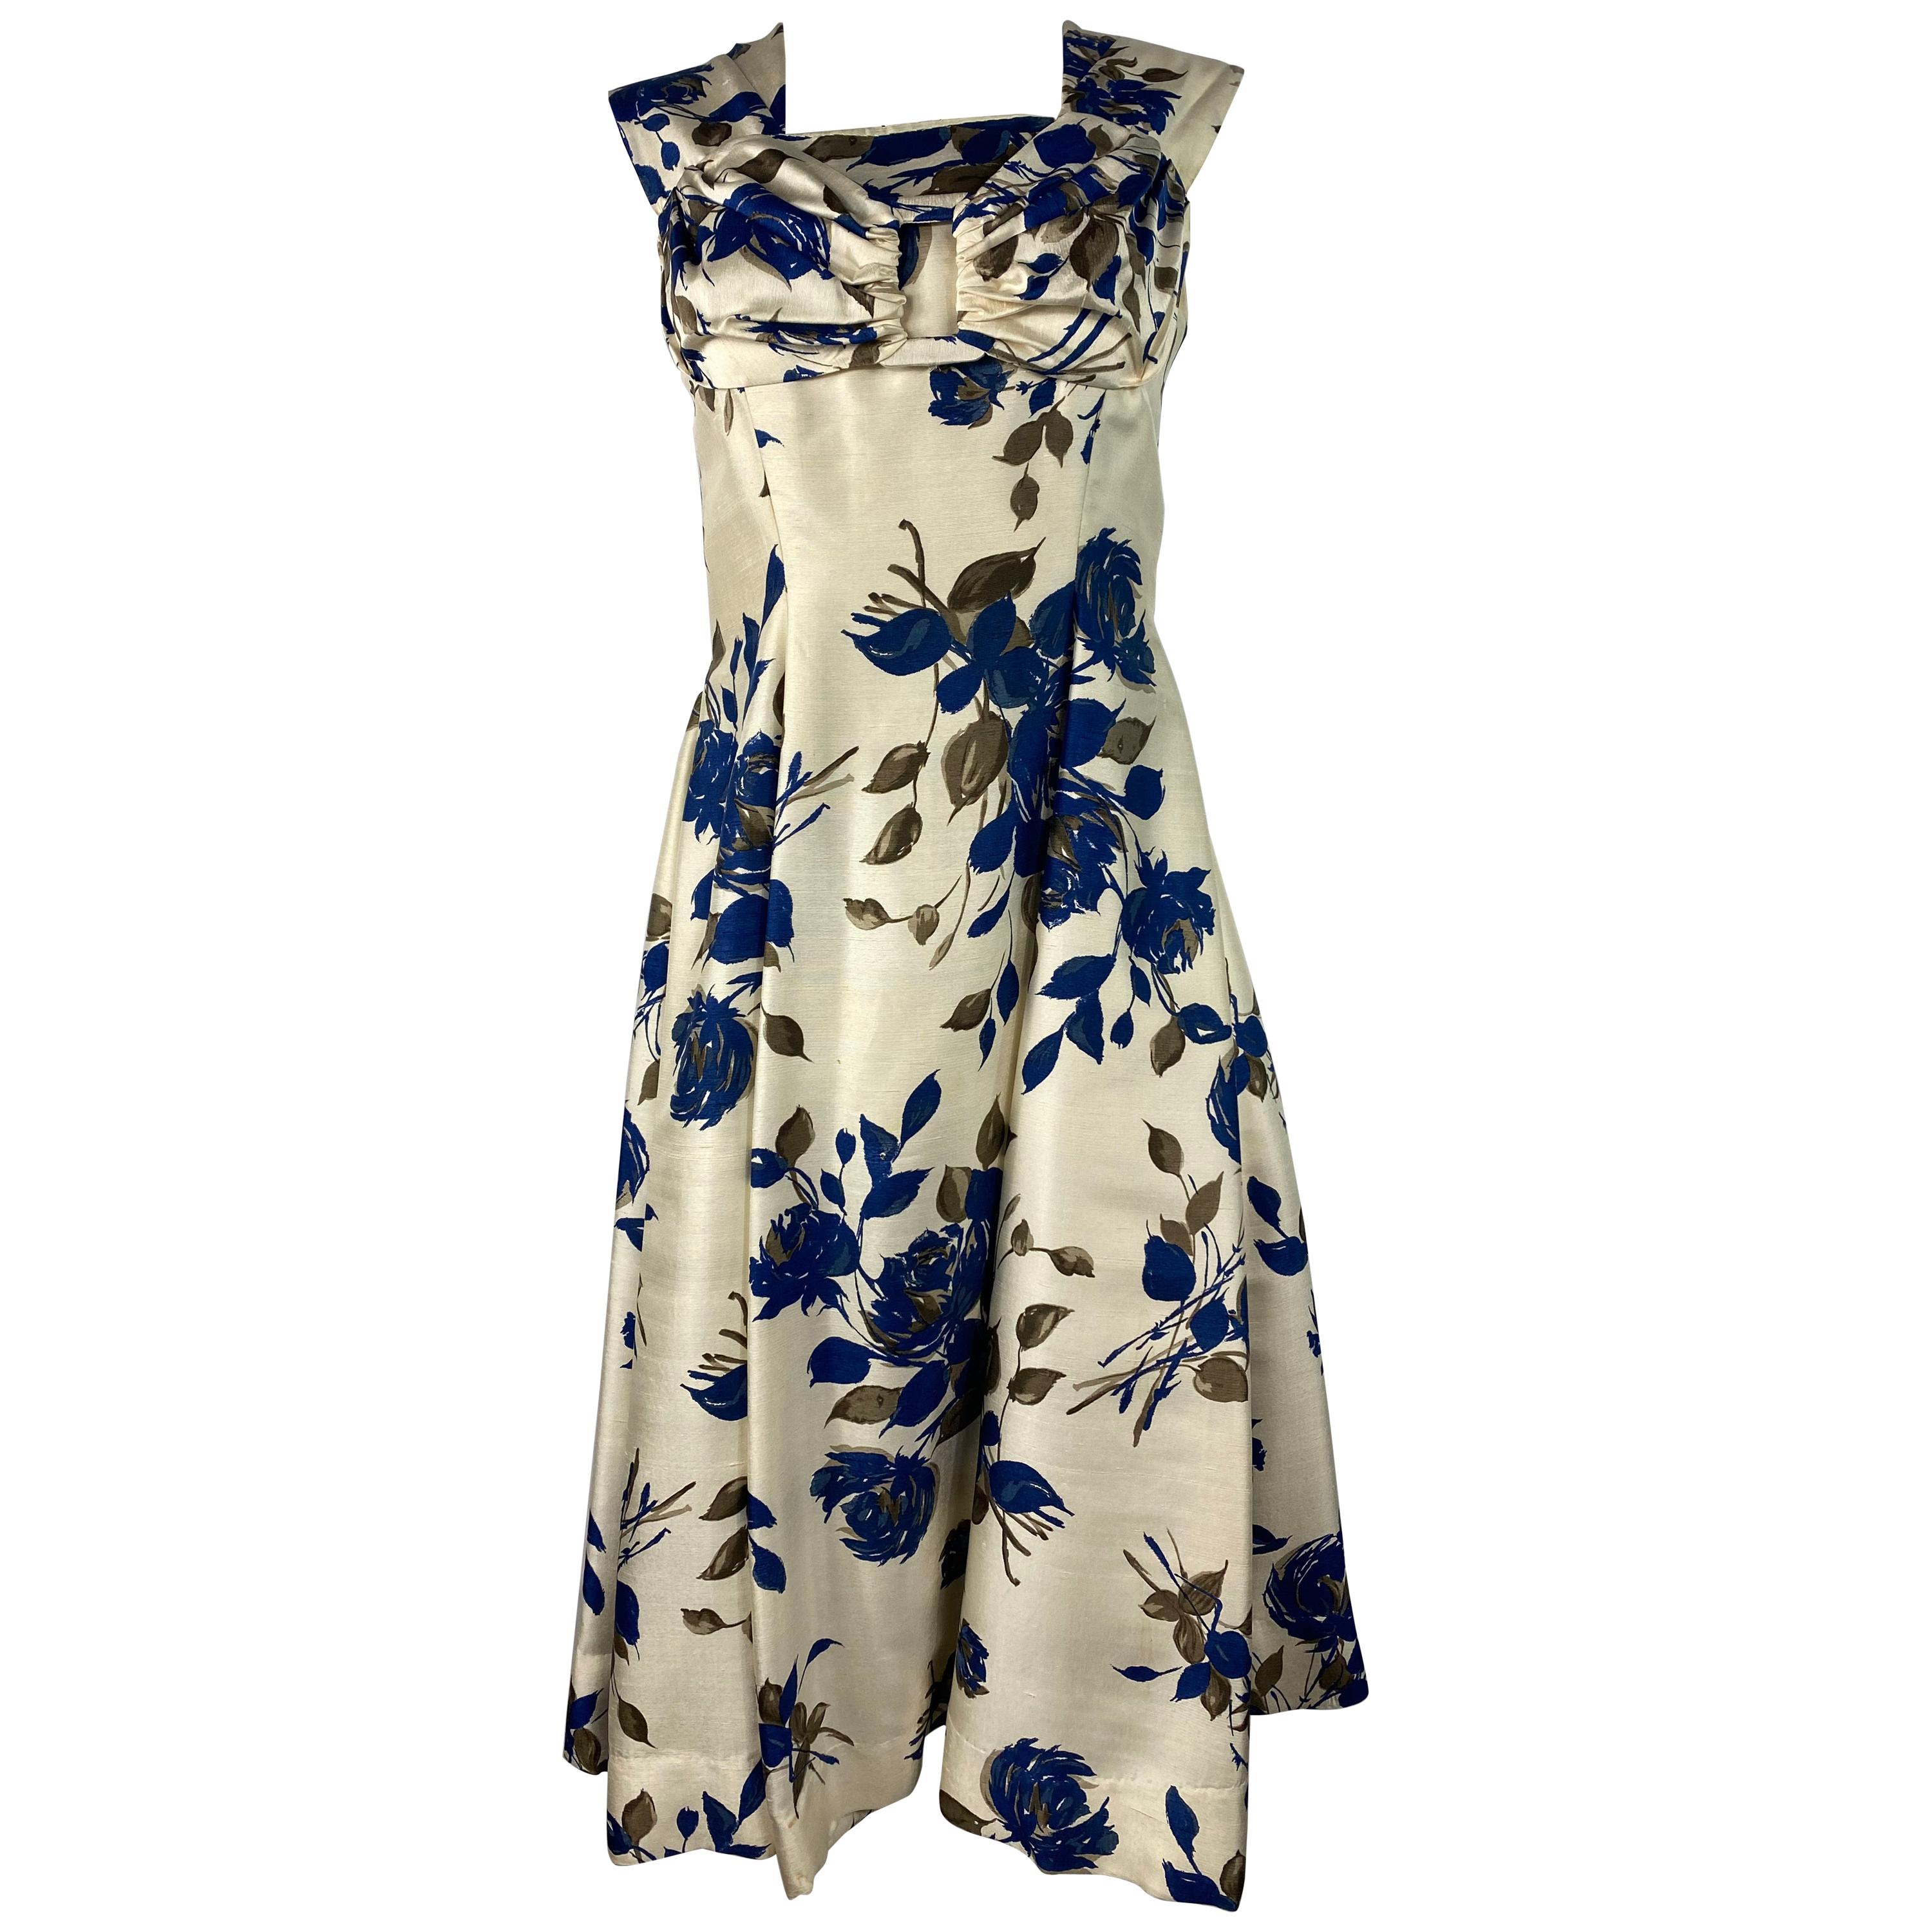 Marwi Cream and Navy Floral Sleeveless Dress, Size 40